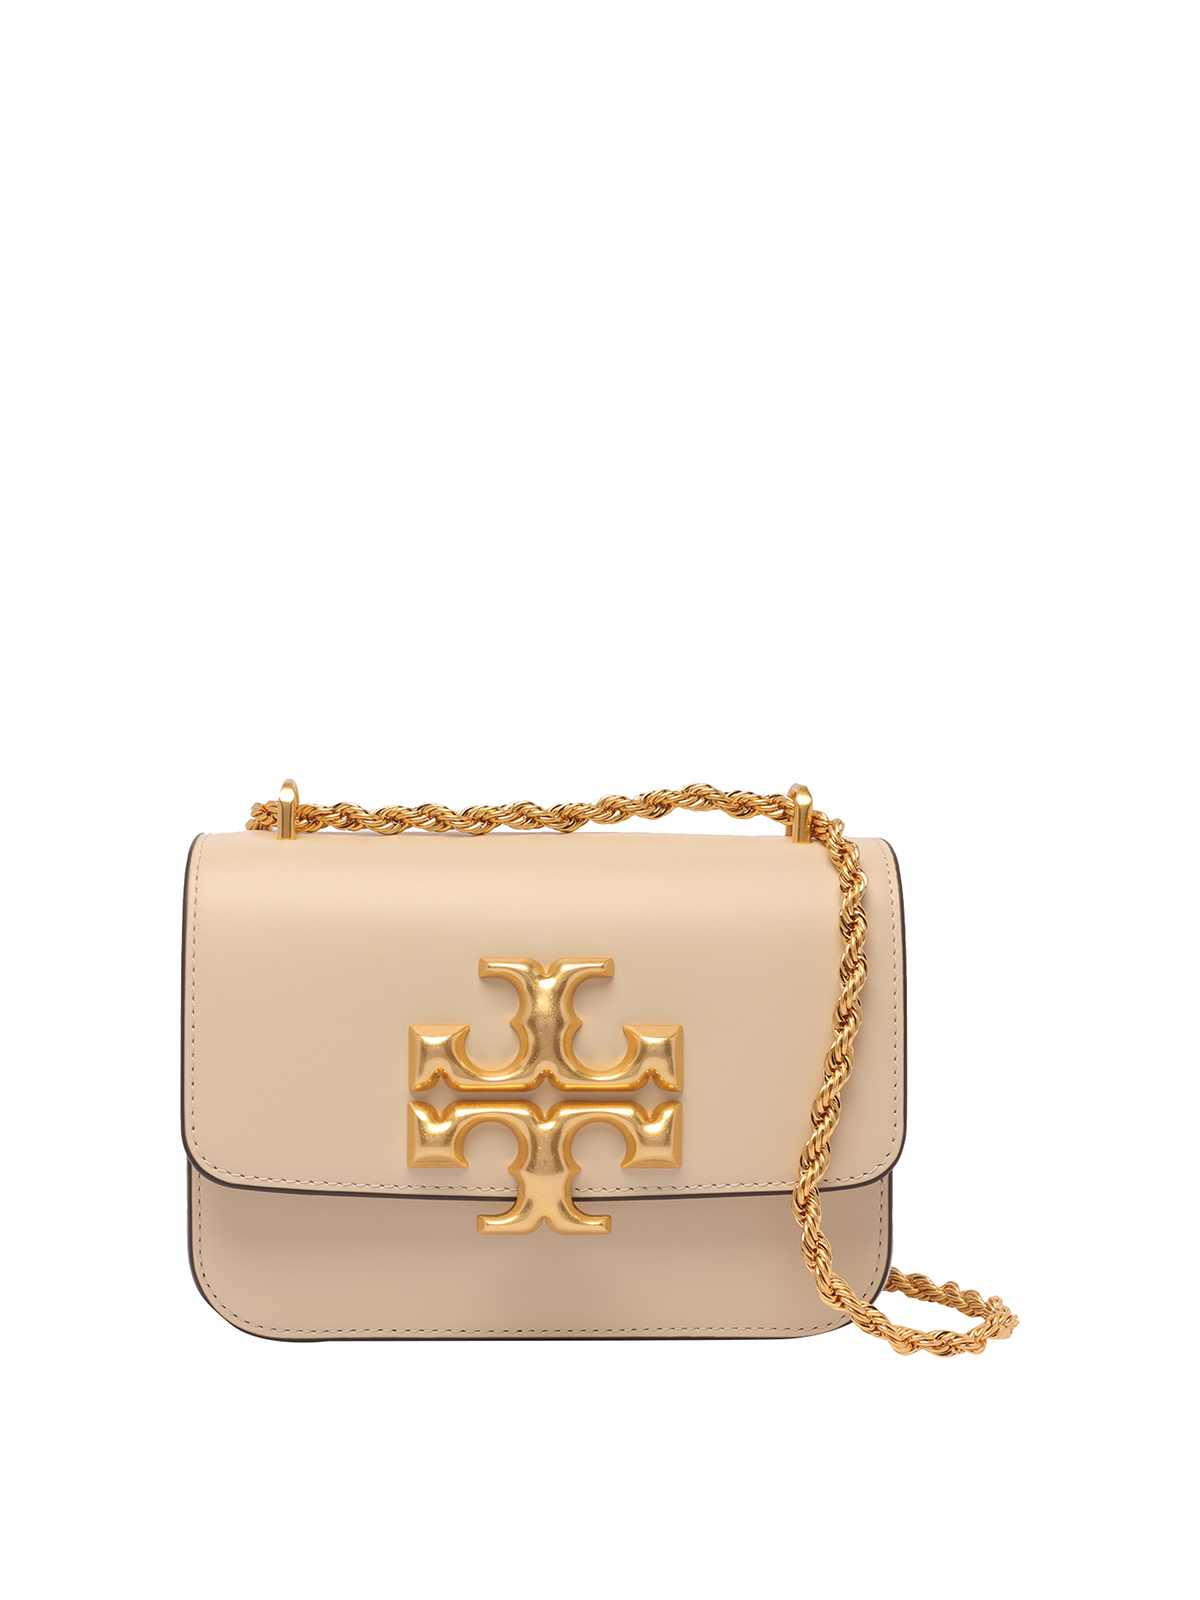 ELEANOR SMALL CONVERTIBLE SHOULDER BAG for Women - Tory Burch